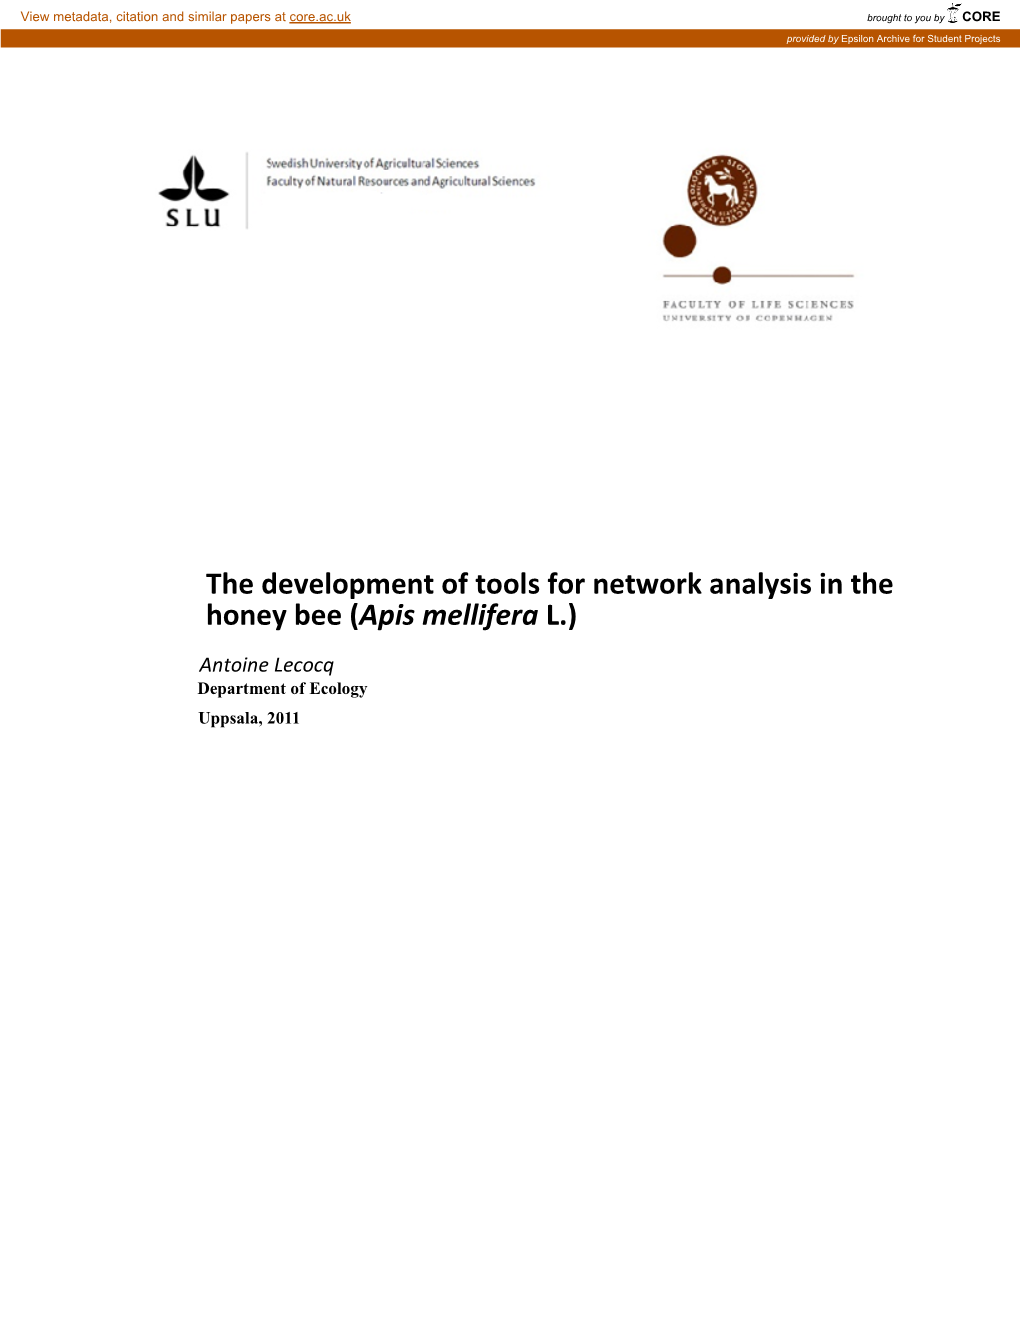 The Development of Tools for Network Analysis in the Honey Bee (Apis Mellifera L.)